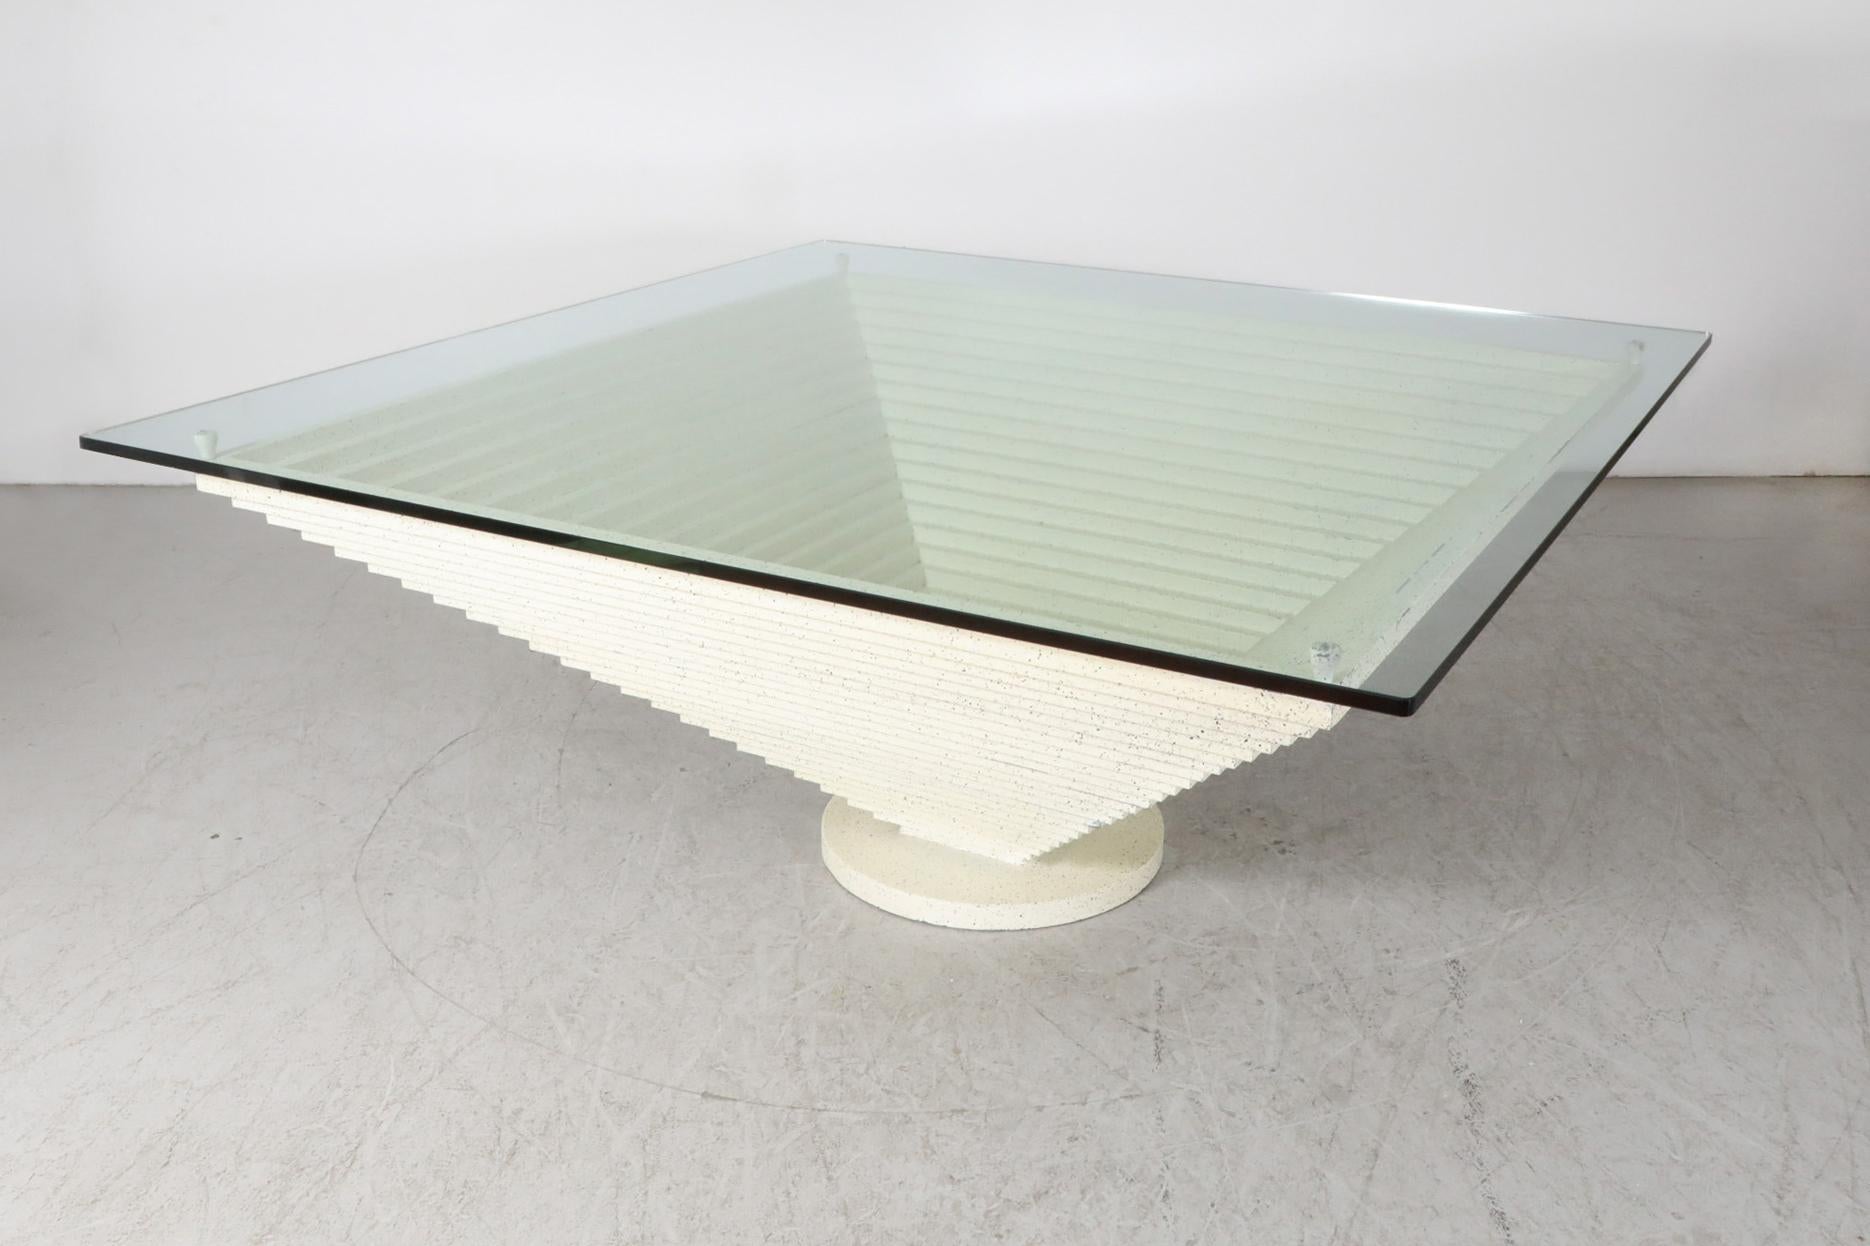 Giant Modernist Memphis Speckled Cream & Black Pyramid Table w/ Glass Top, 1980s In Good Condition For Sale In Los Angeles, CA